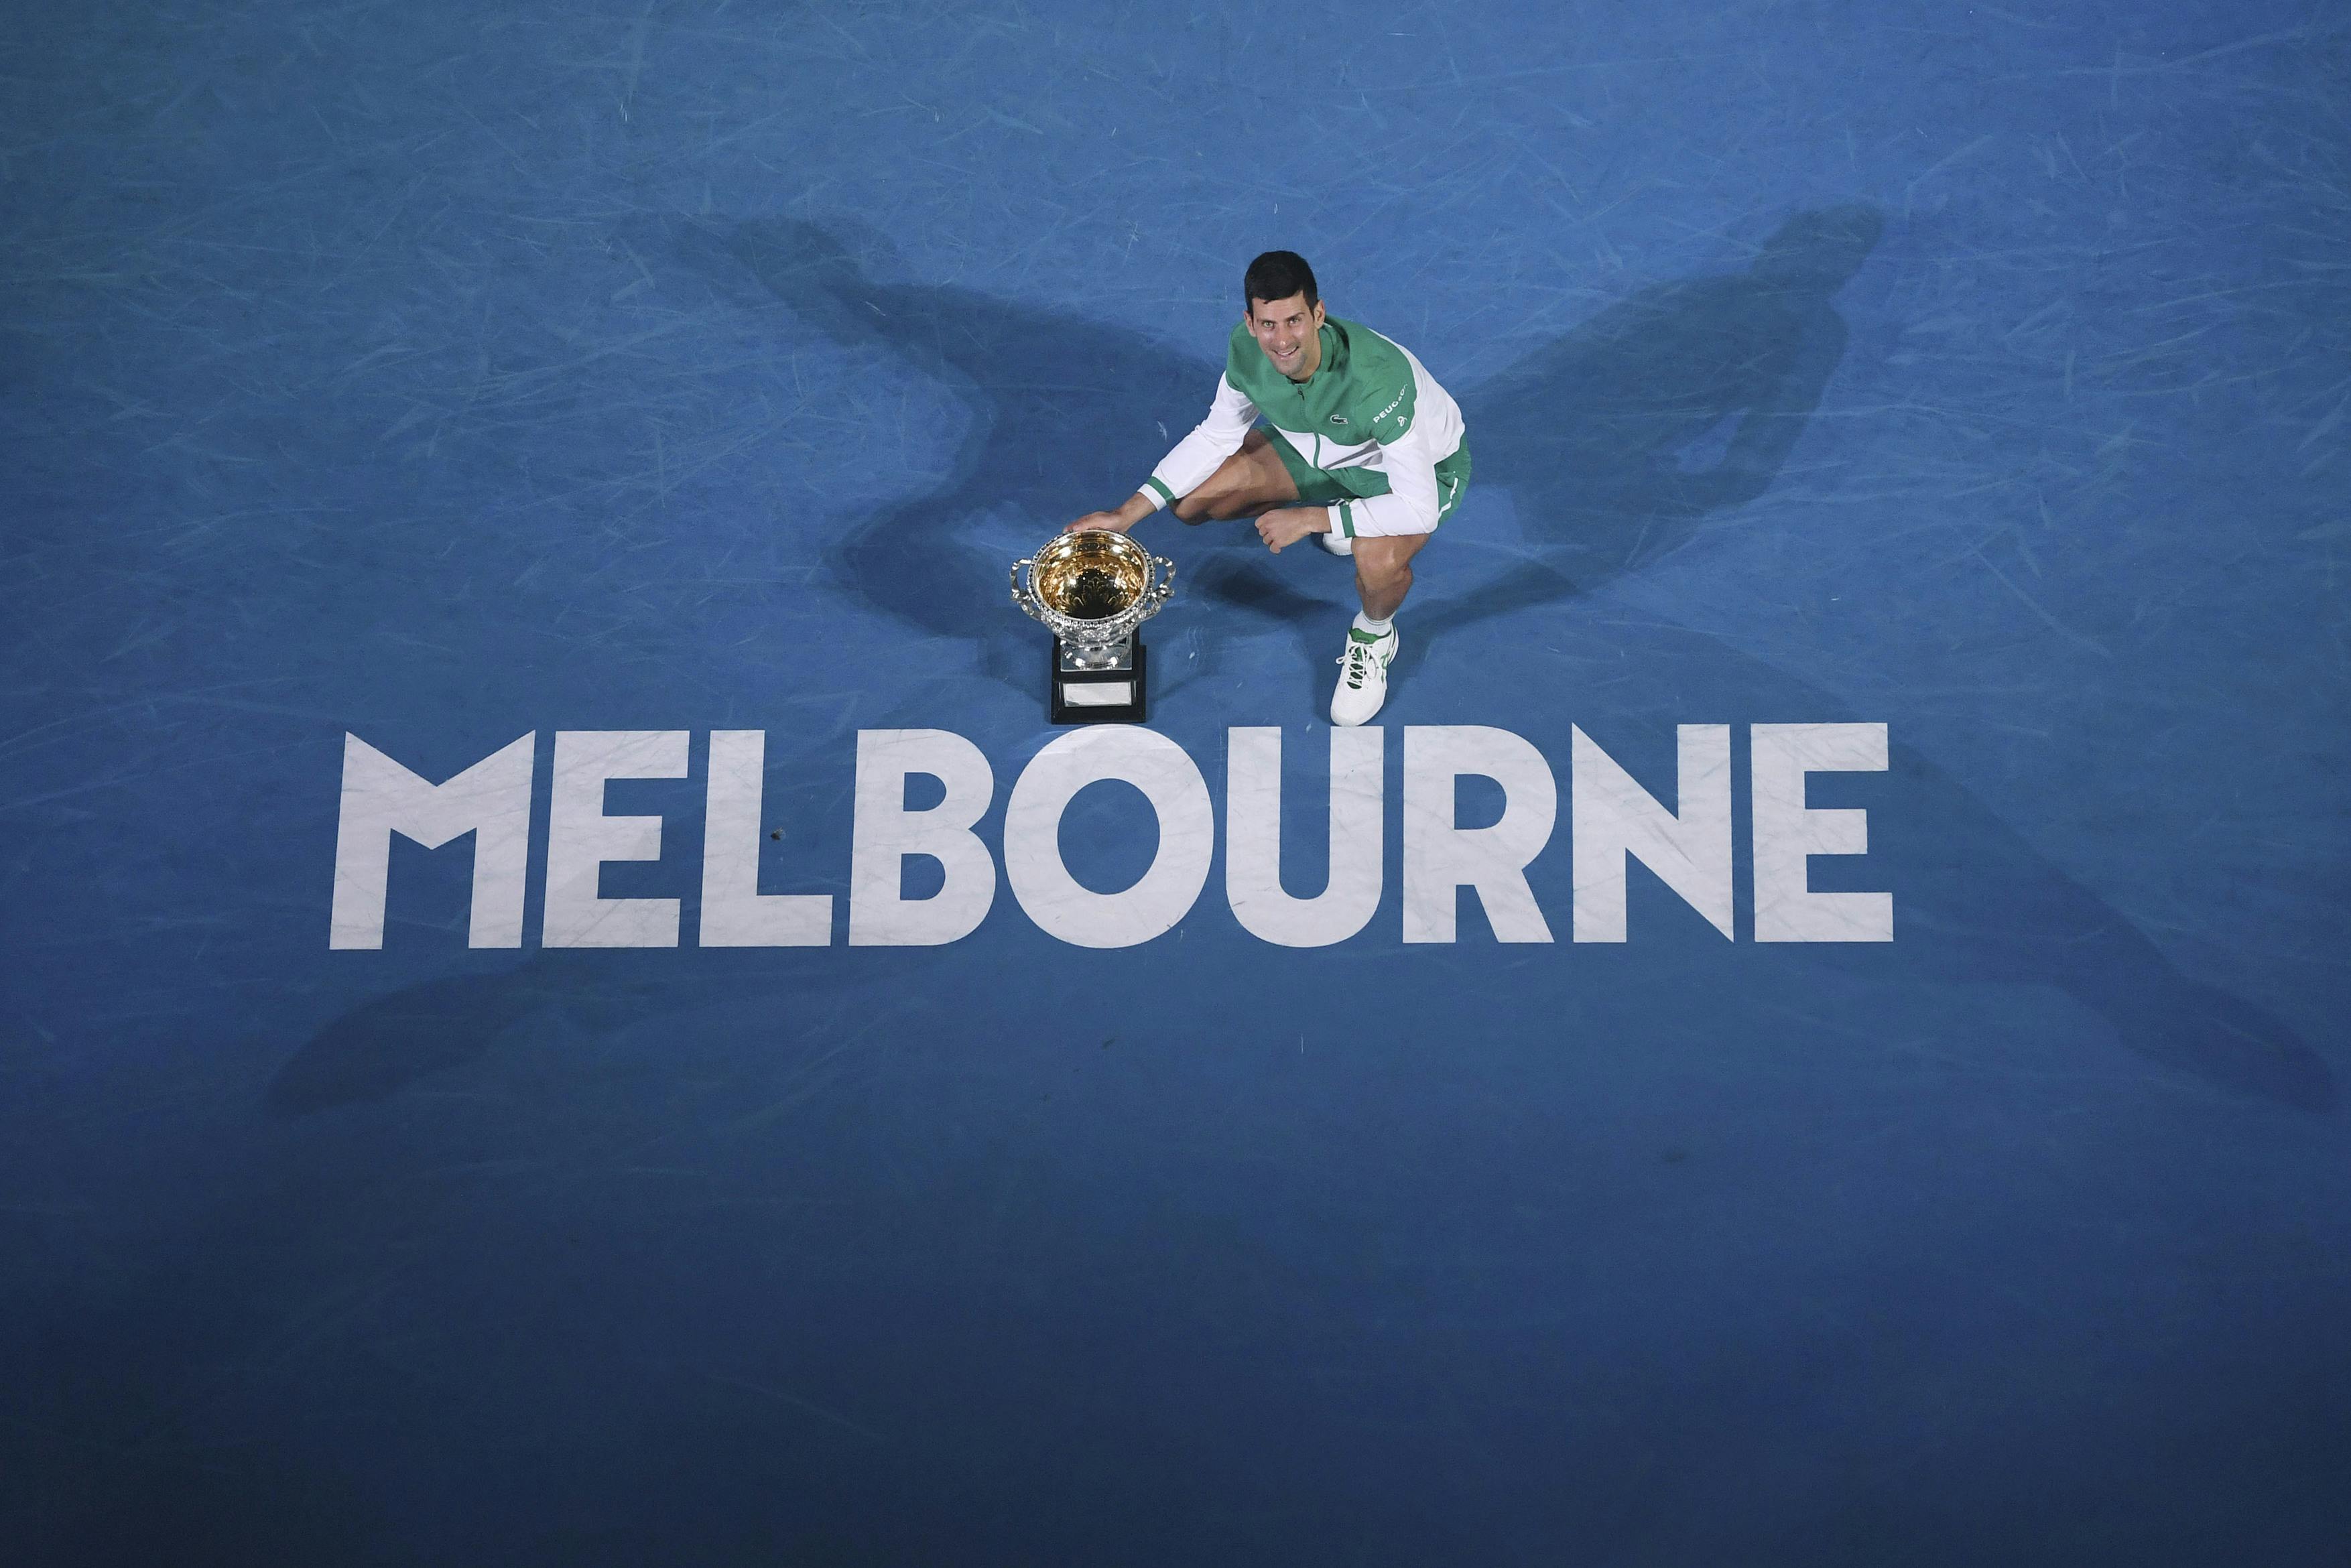 King of Melbourne Djokovic determined to be crowned the greatest